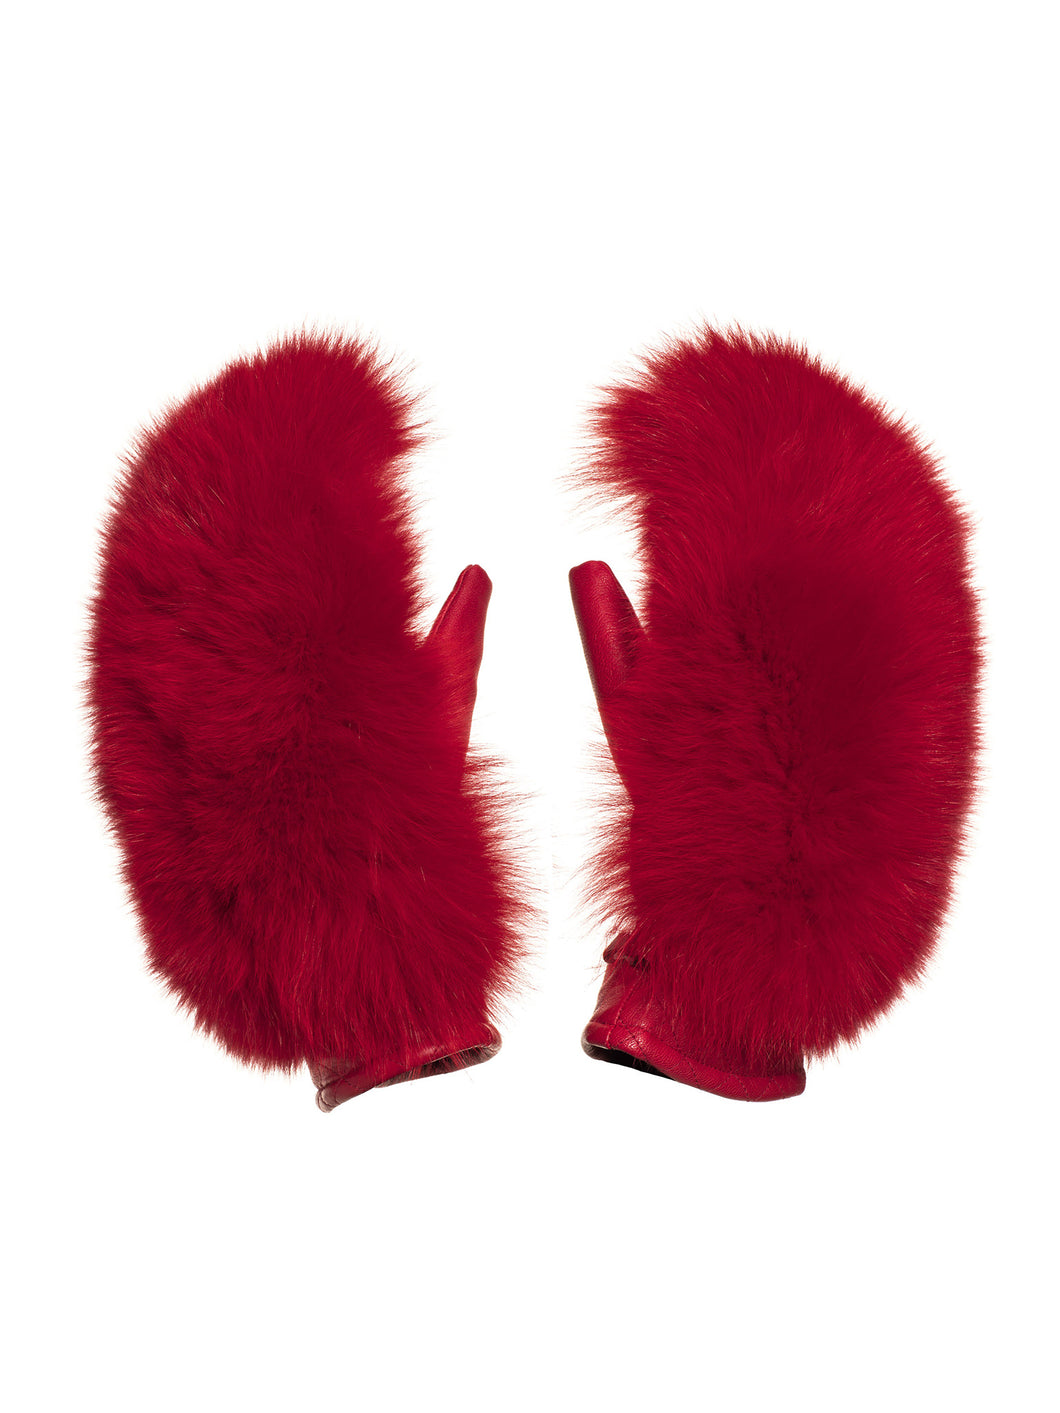 Hando Mittens Real Coyote + Real Fox Fur - Red